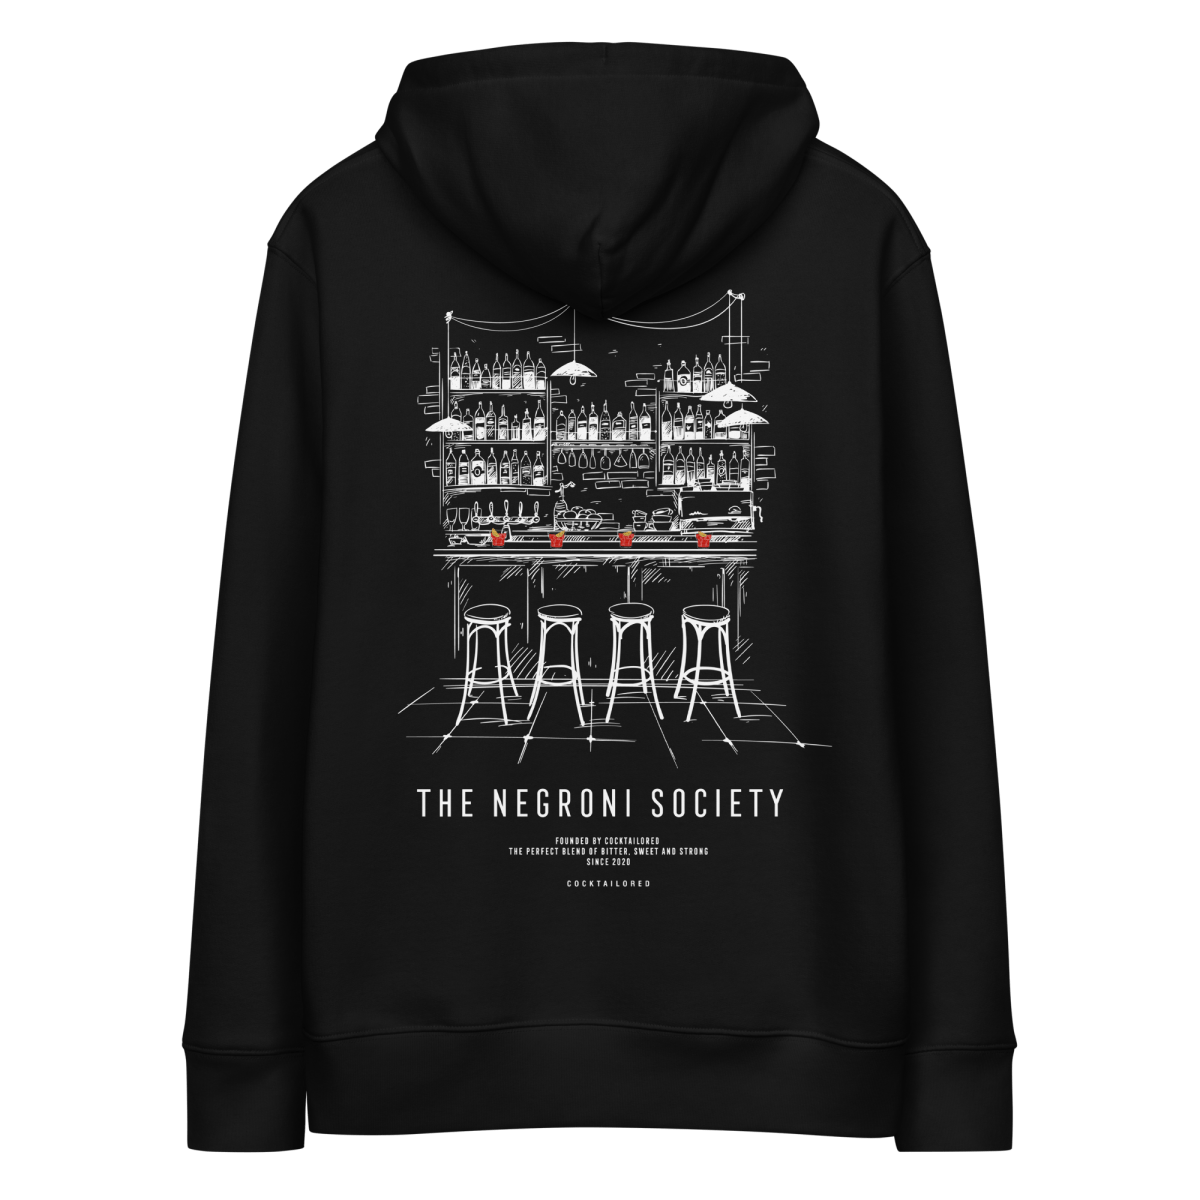 The Negroni Society "The Bar" Eco Hoodie